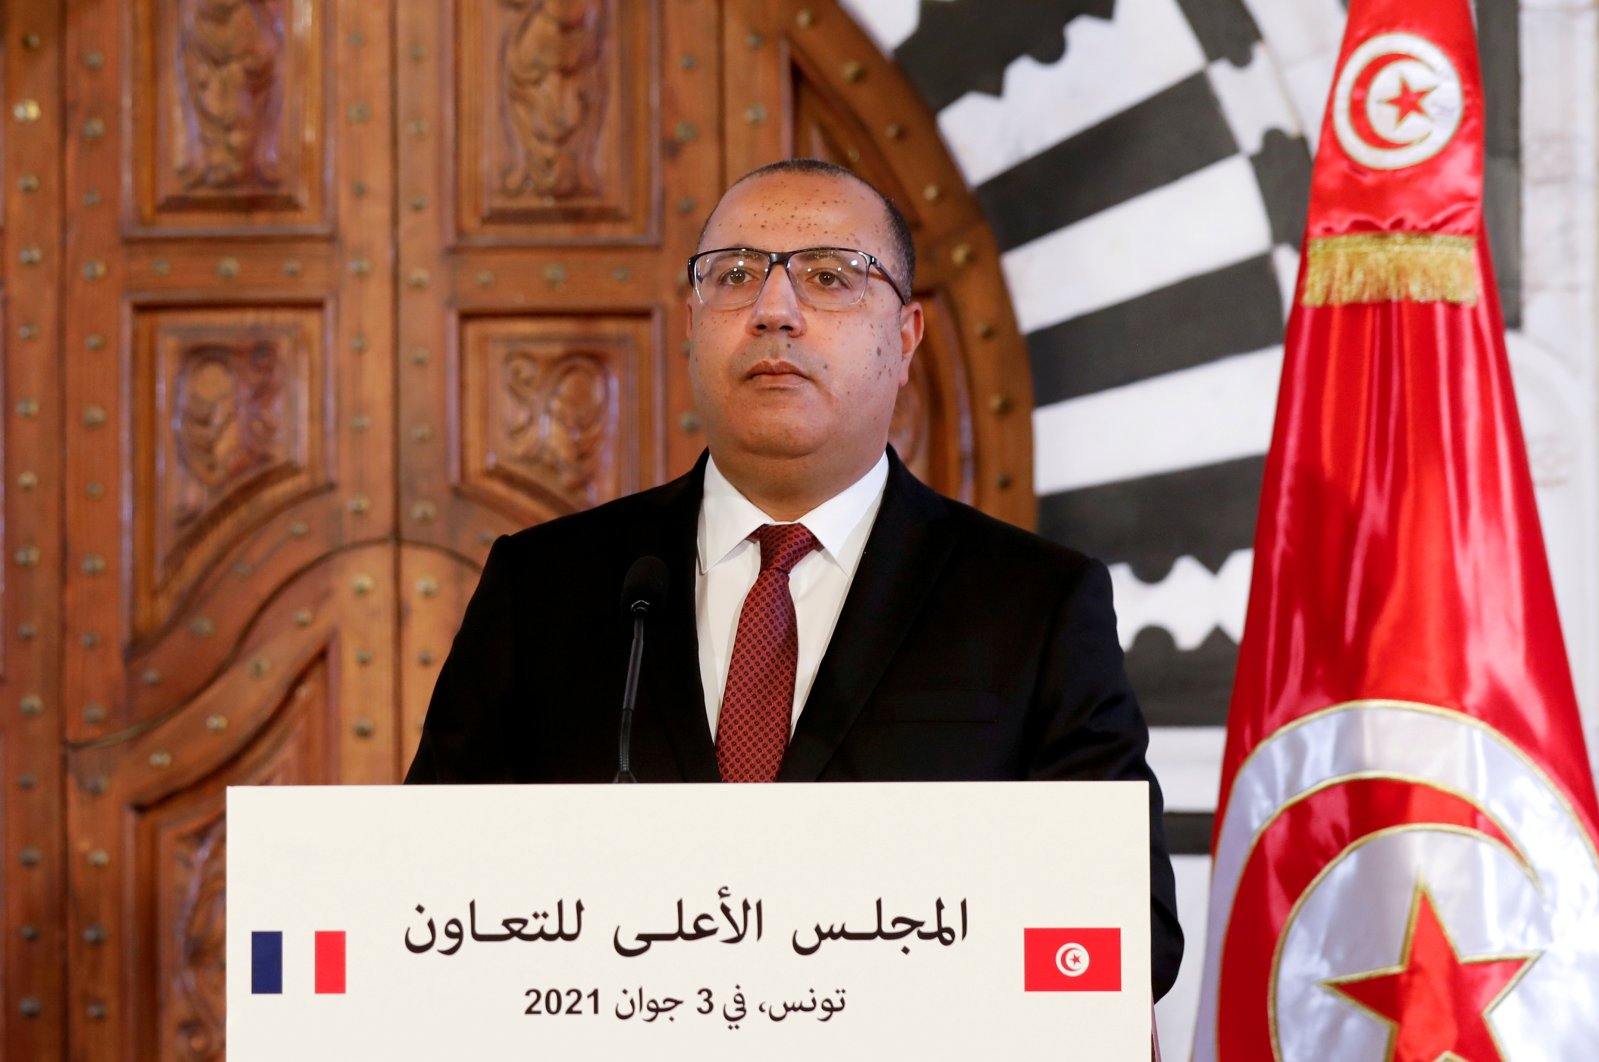 Tunisia's Prime Minister is leaving his large parliament